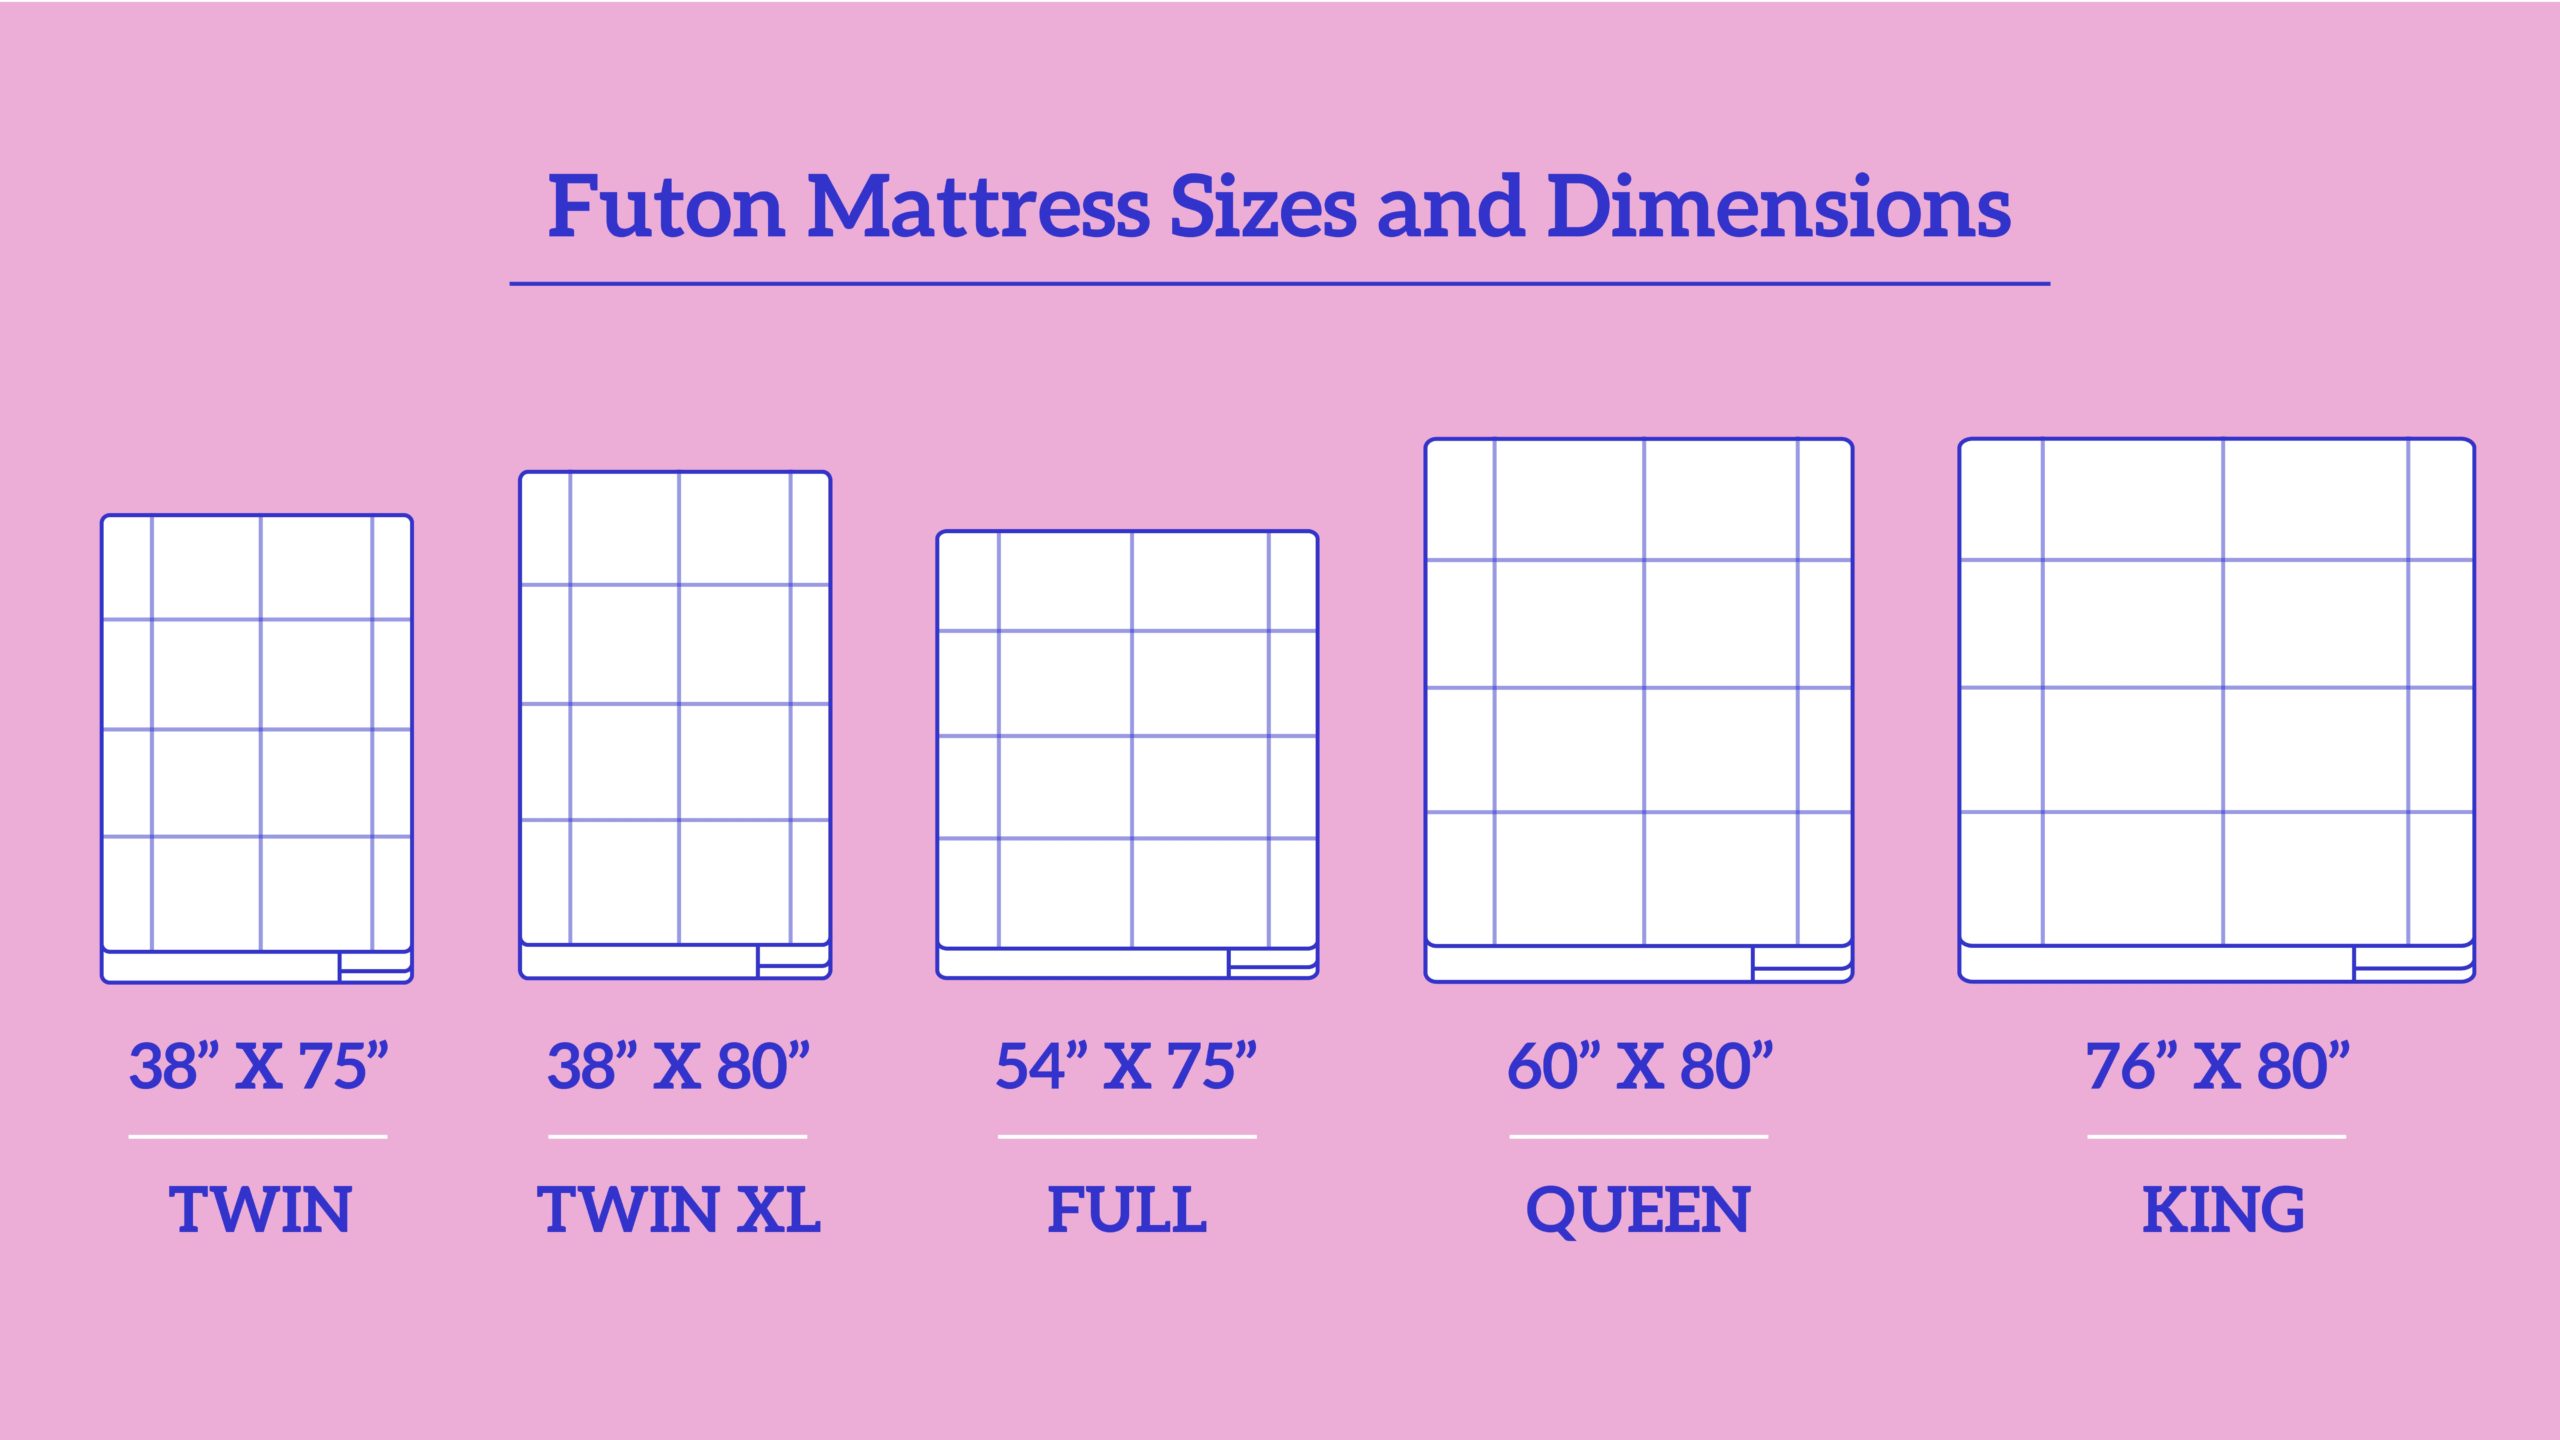 Tips For Choosing The Right Futon Mattress Size